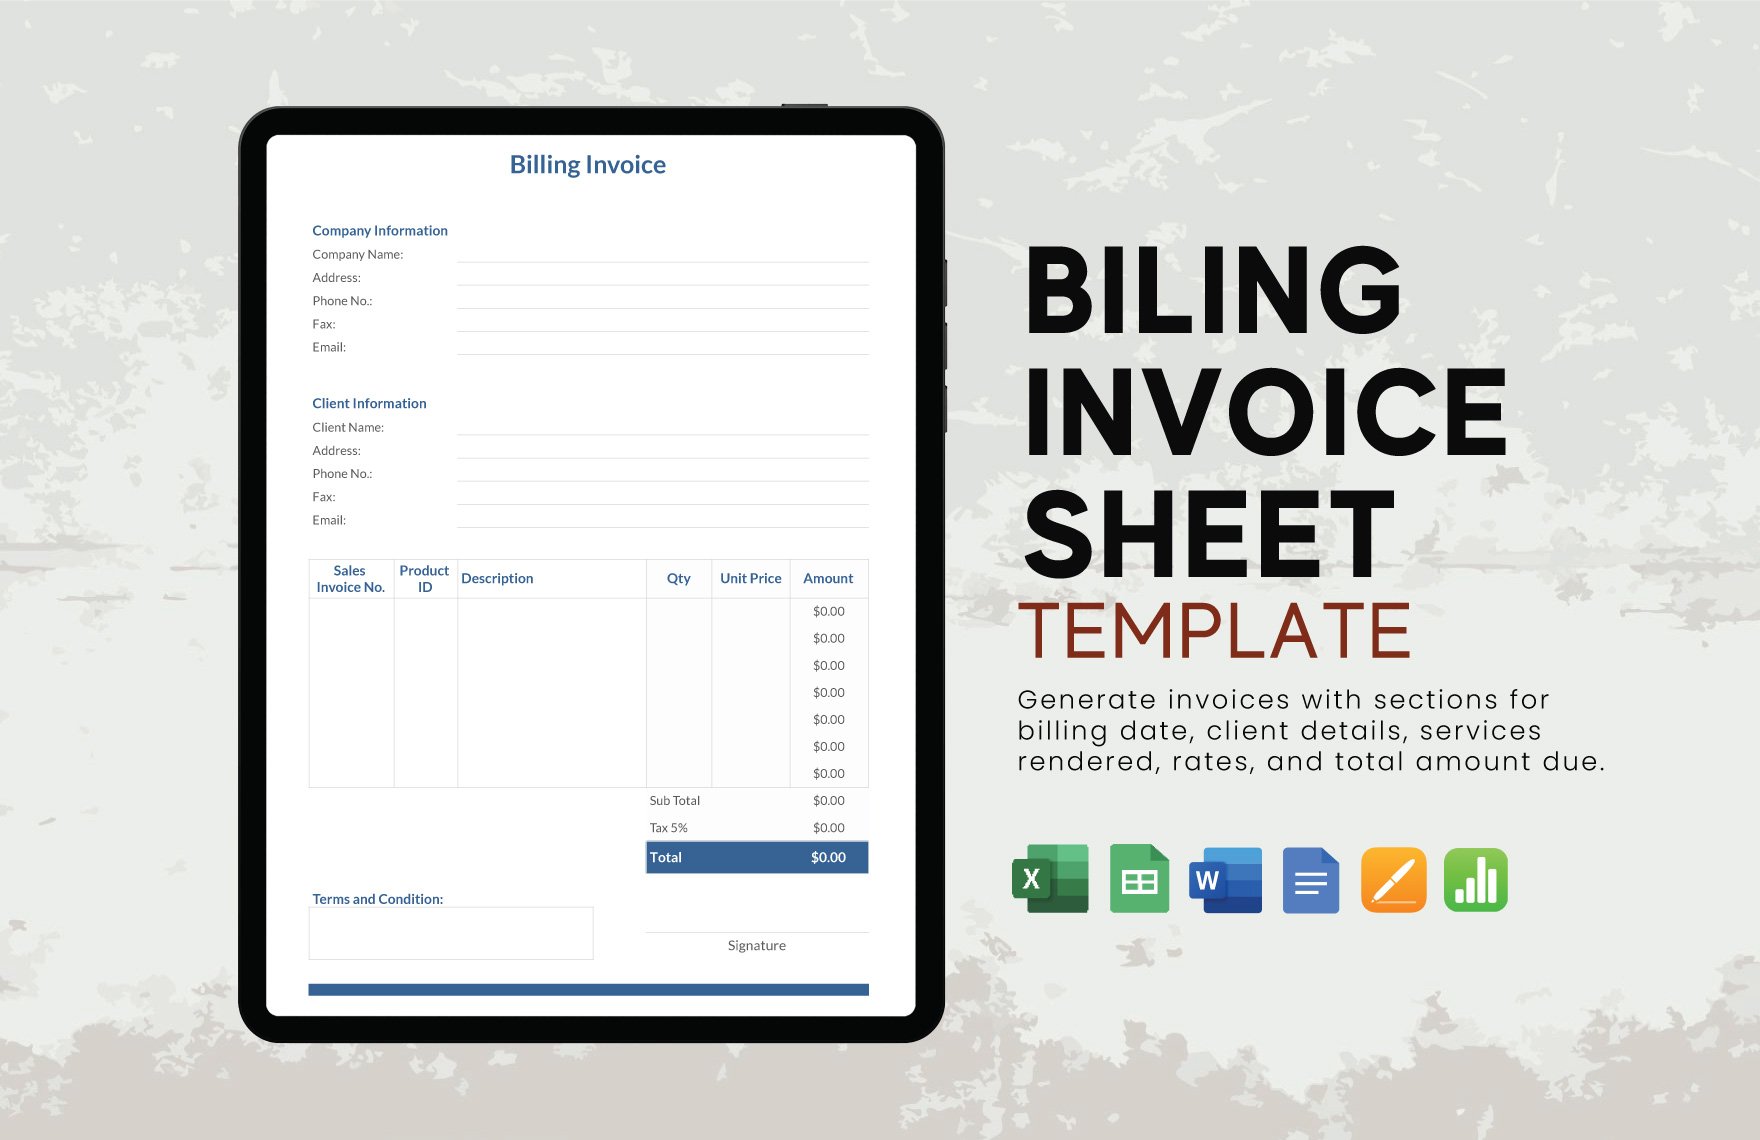 Billing Invoice Sheet Template in Word, Google Docs, Excel, Google Sheets, Apple Pages, Apple Numbers